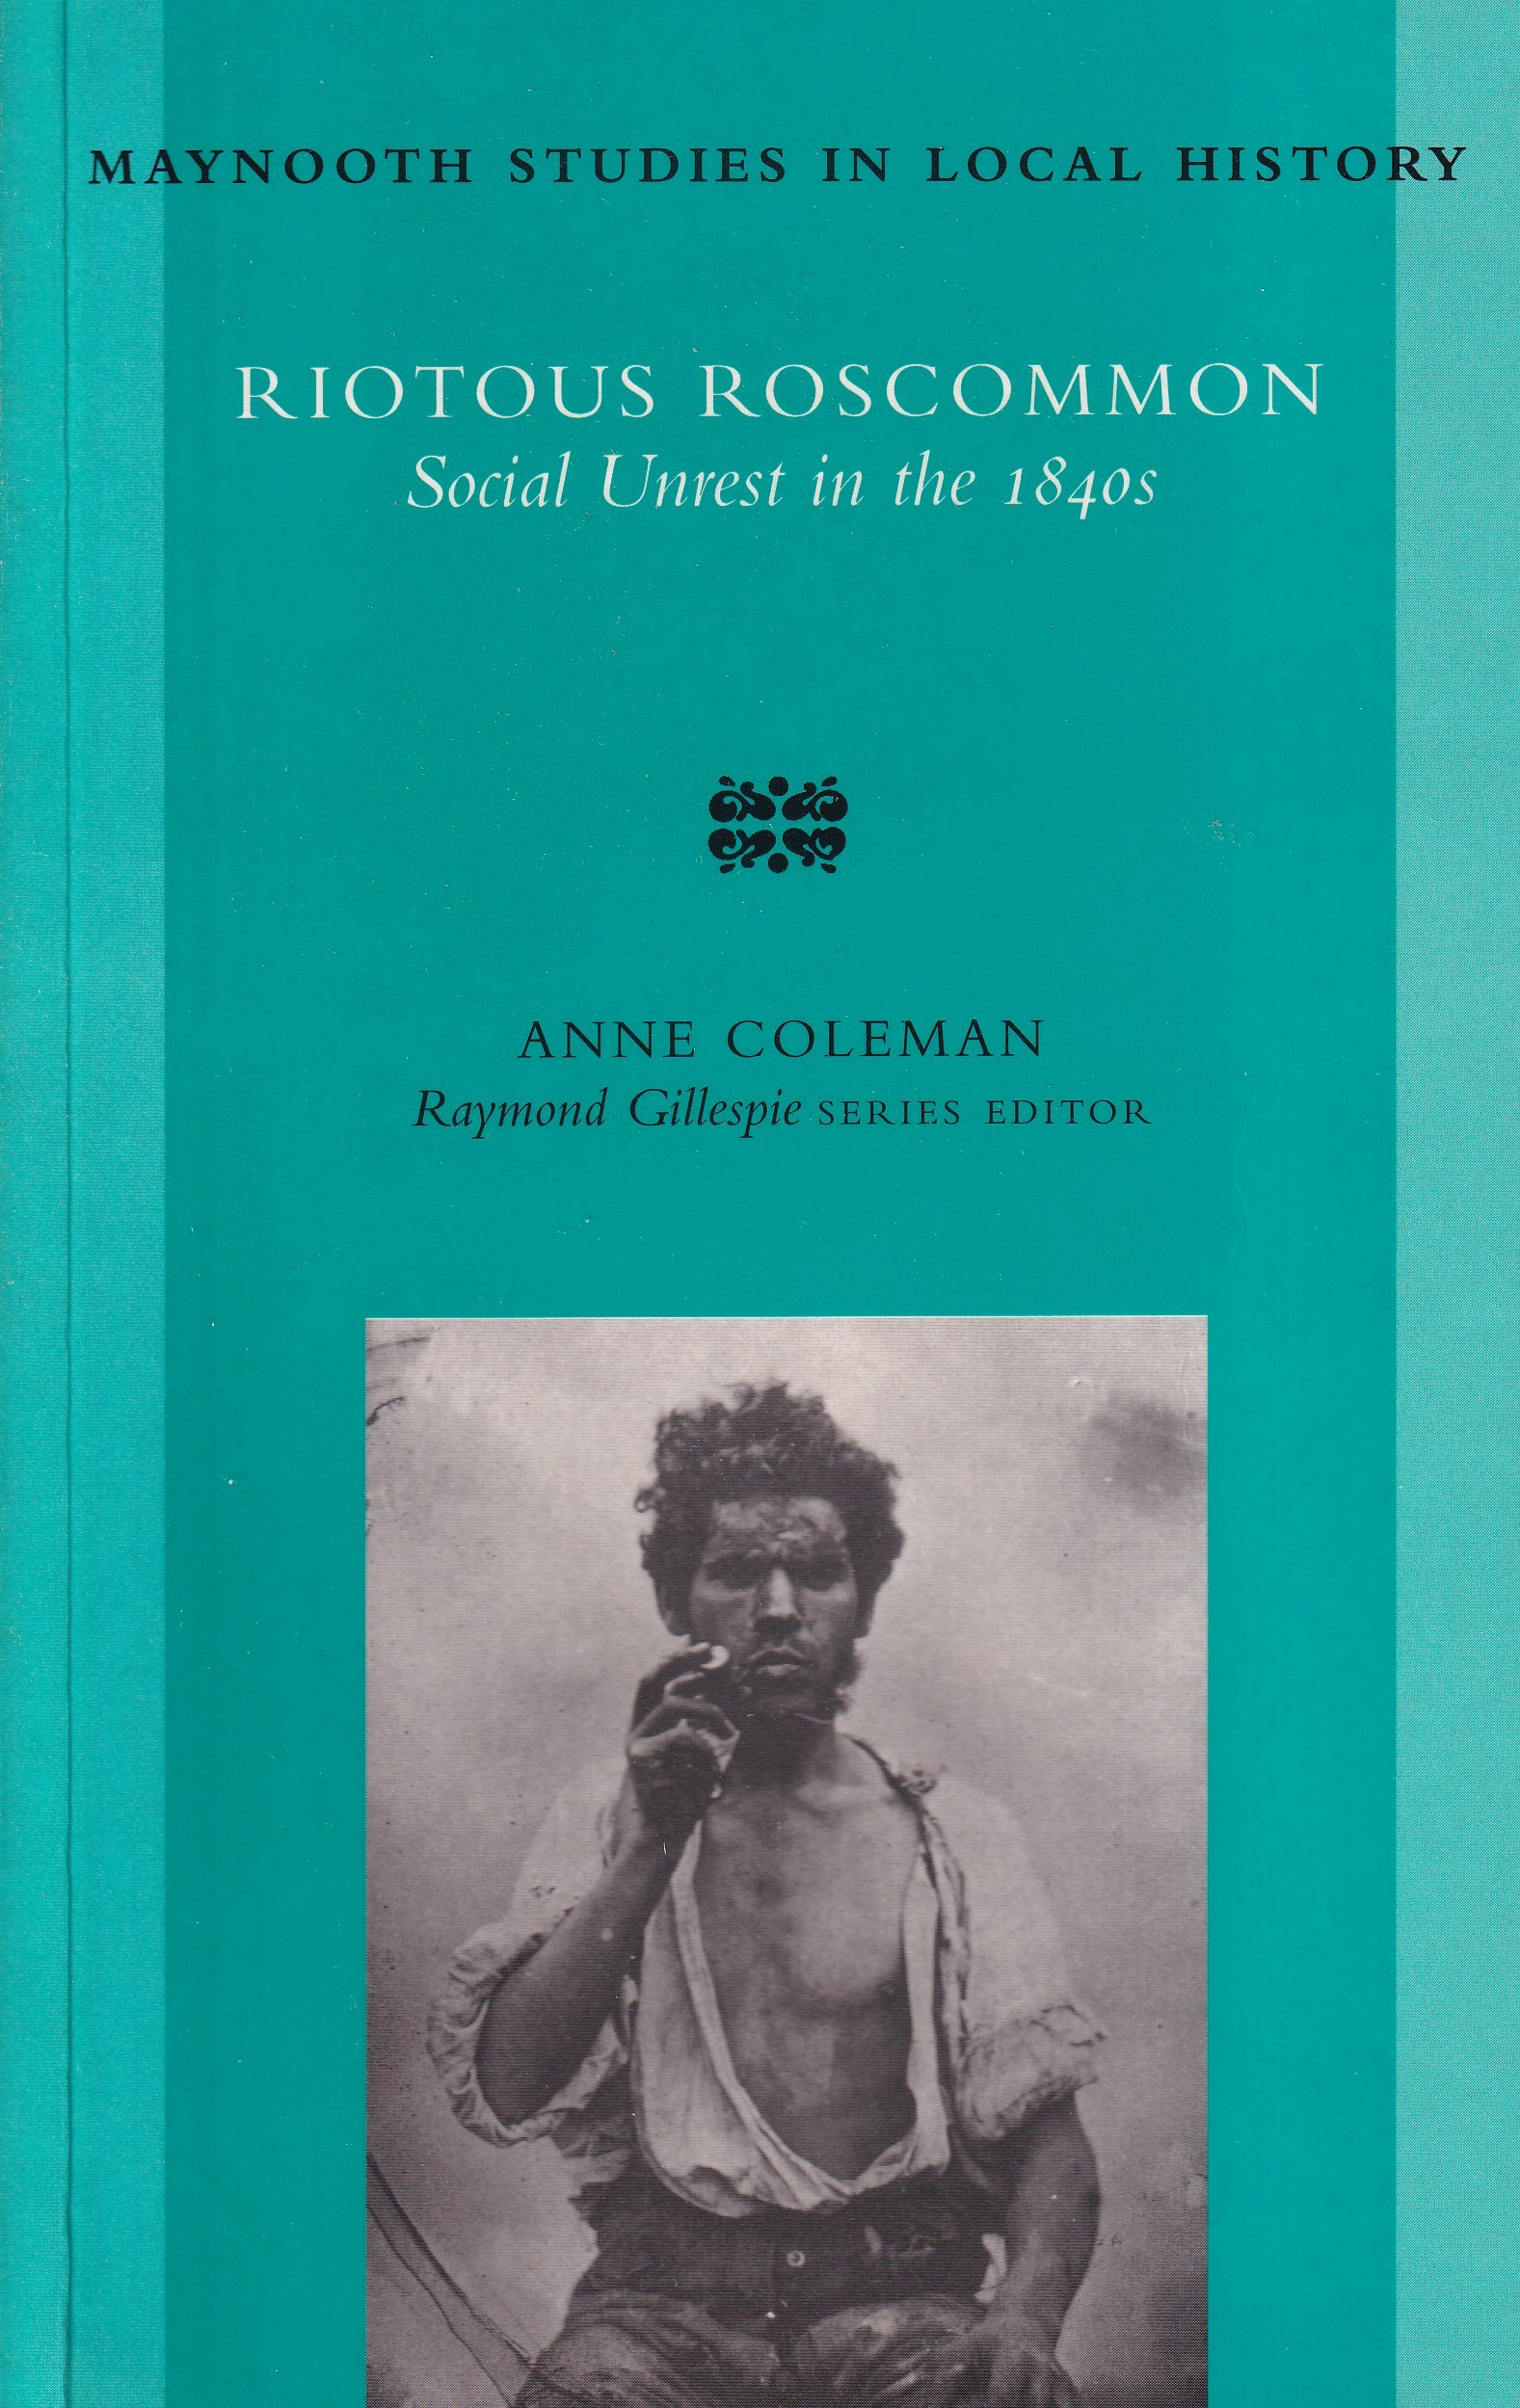 Riotous Roscommon: Social Unrest in 1840s by Anne Coleman